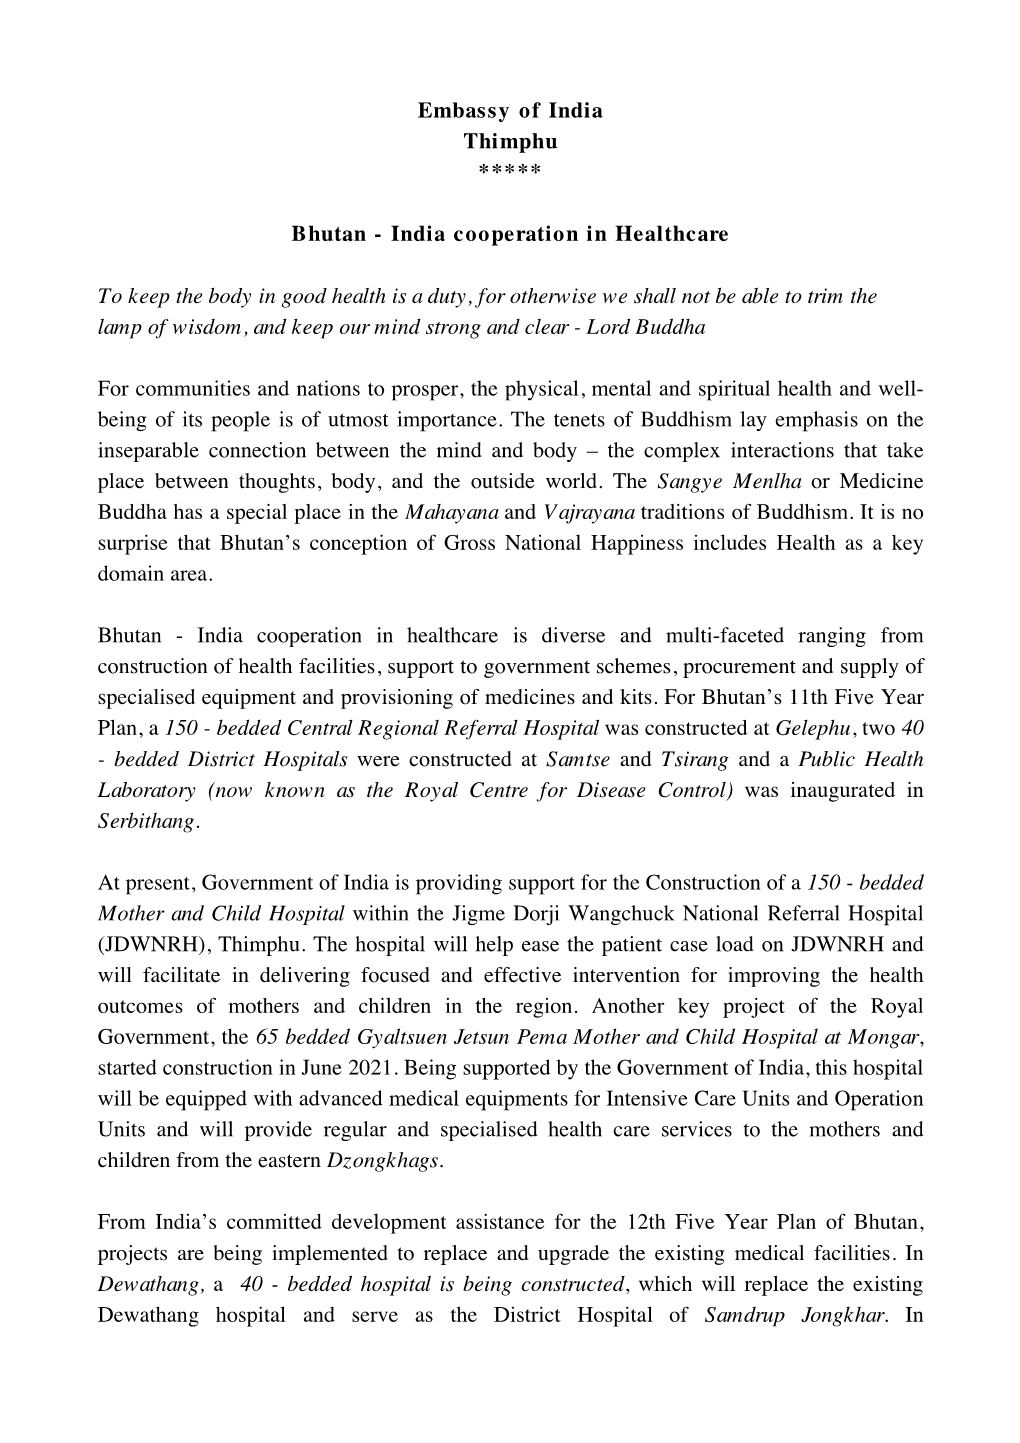 India Cooperation in Healthcare